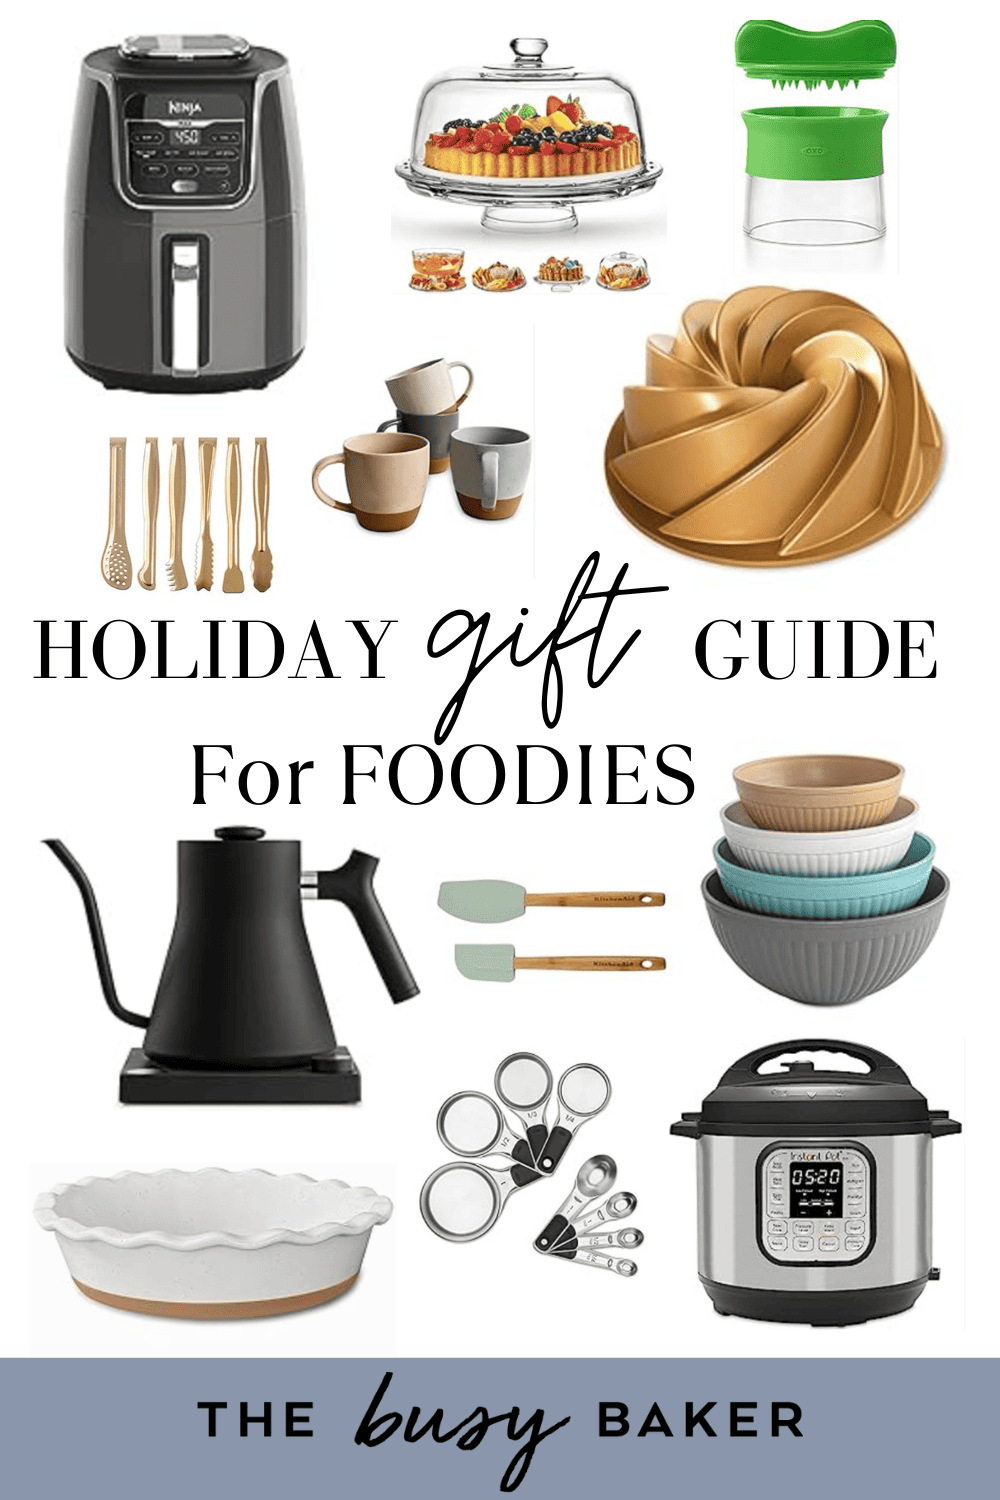 The Home Chef Holiday Gift Guide 2022